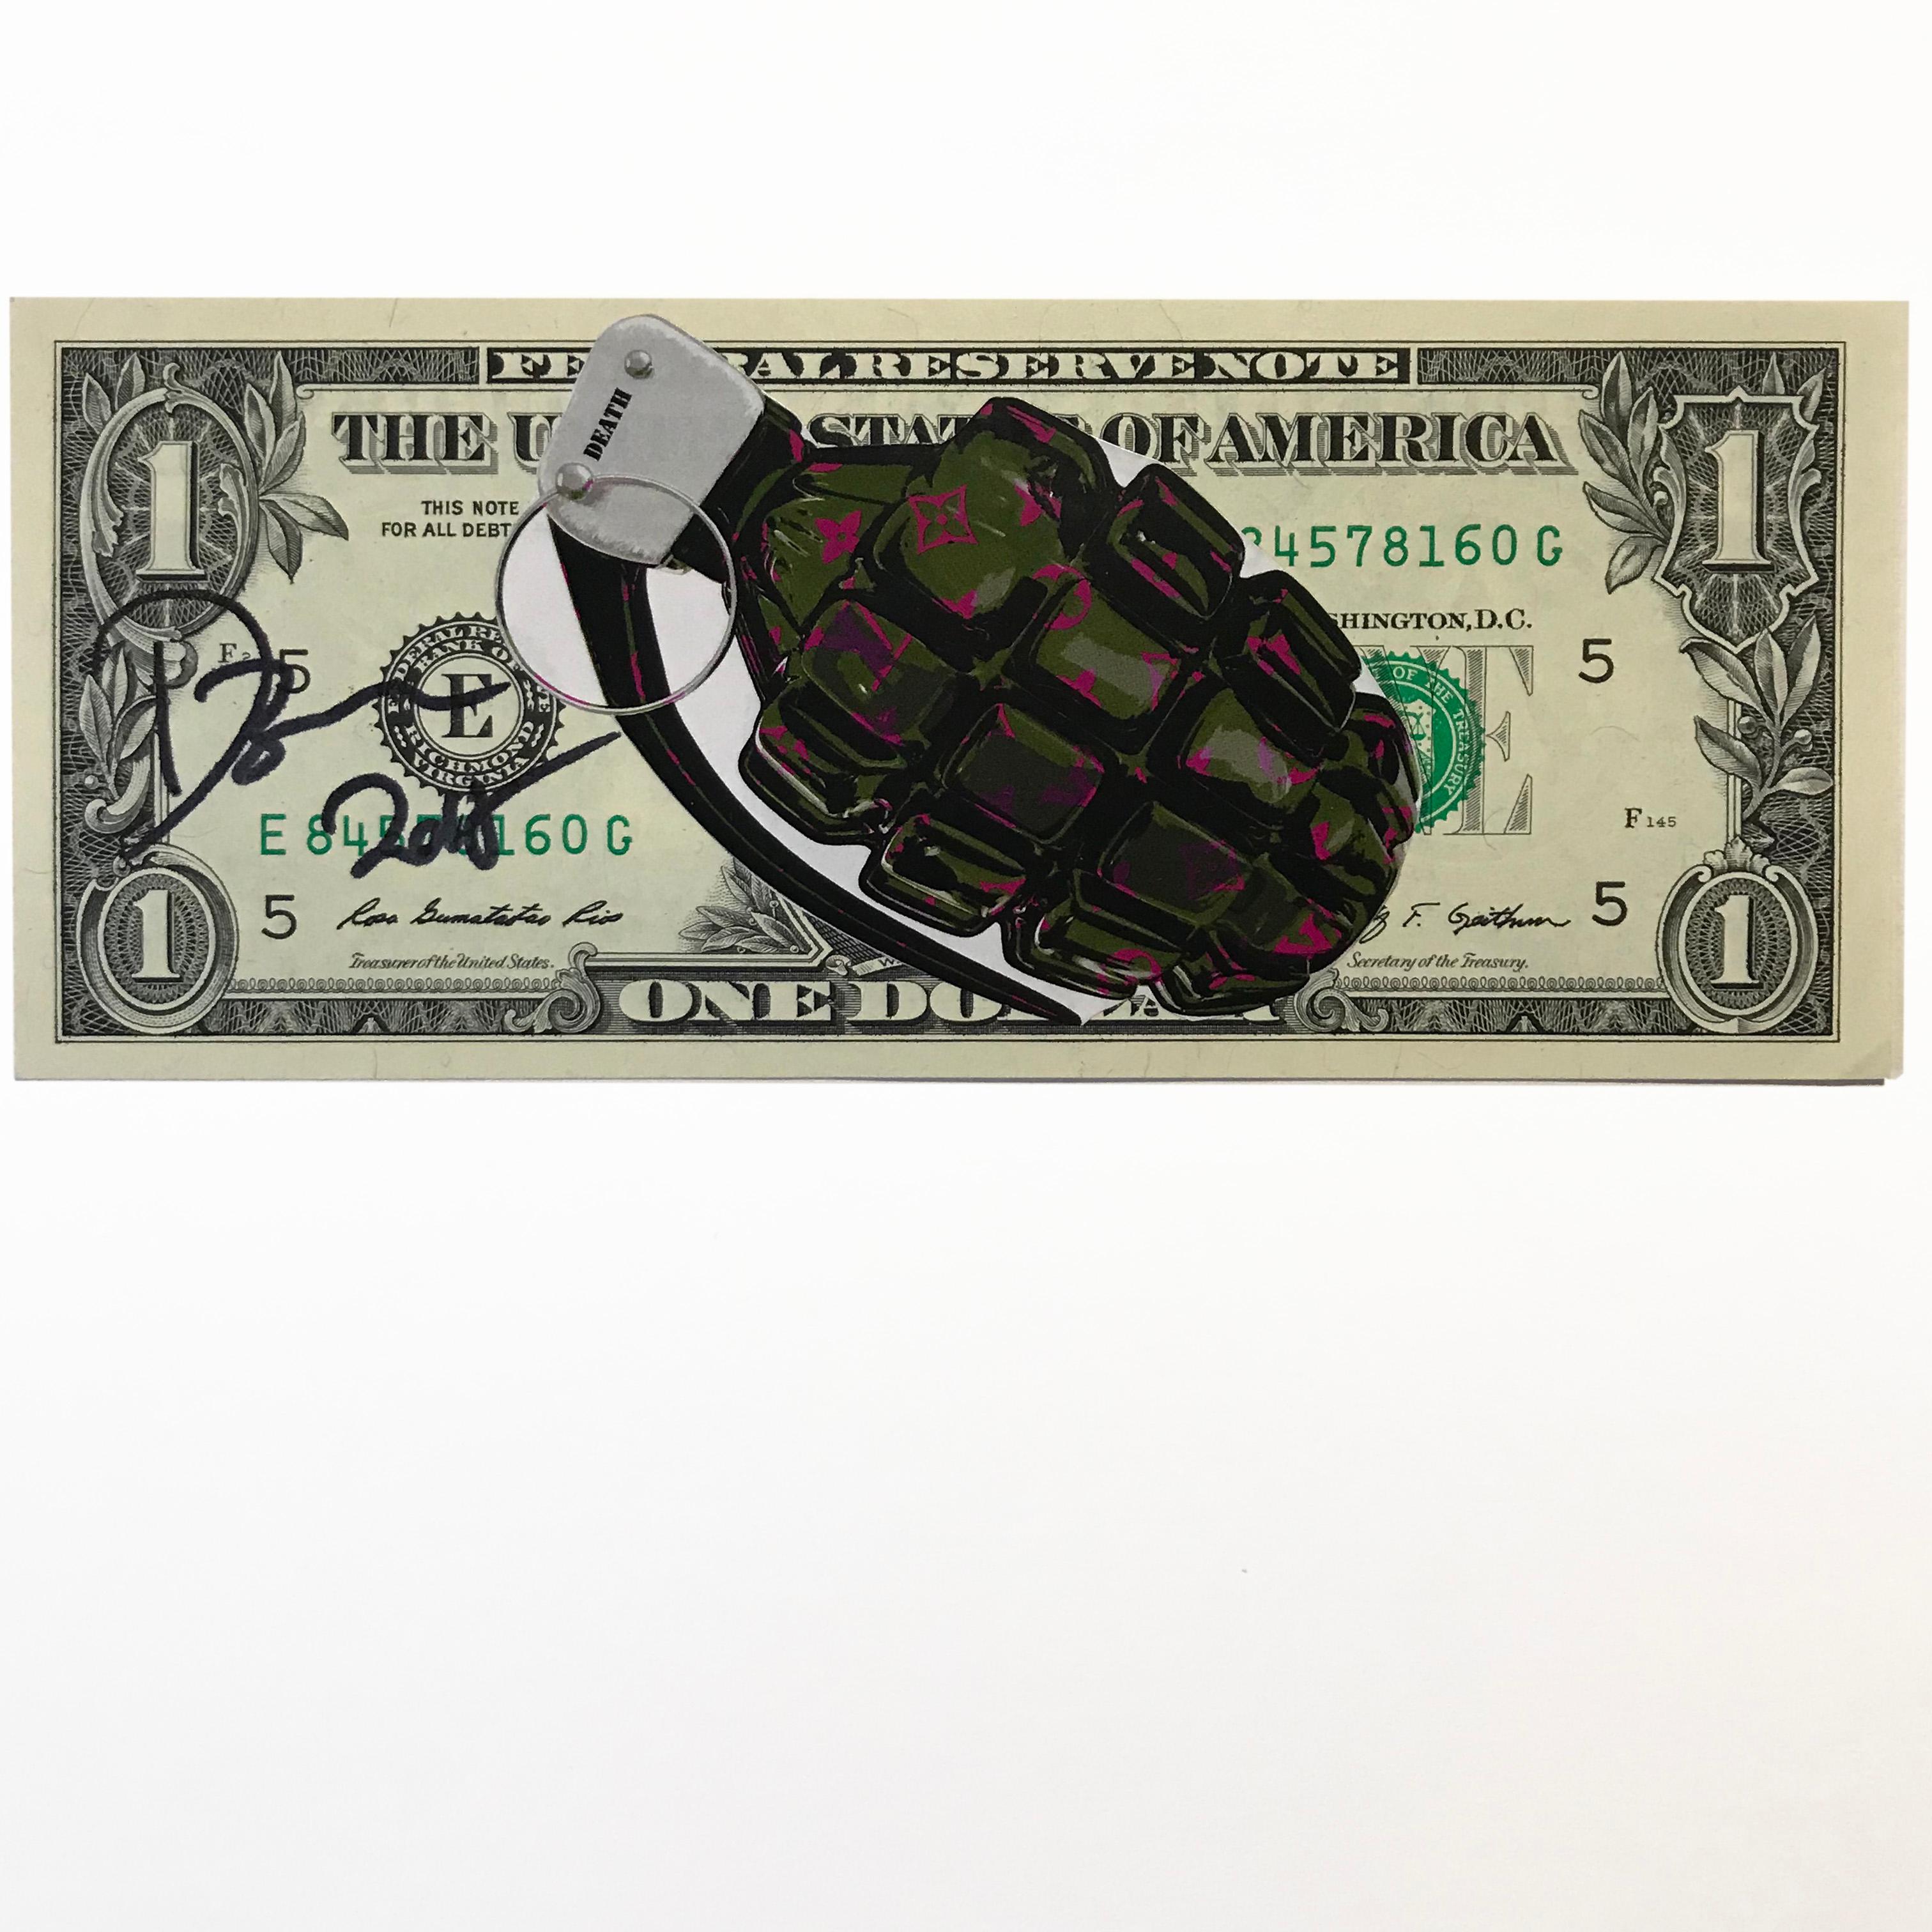 Vuitton Grenade - Mixed Media Art by Death NYC